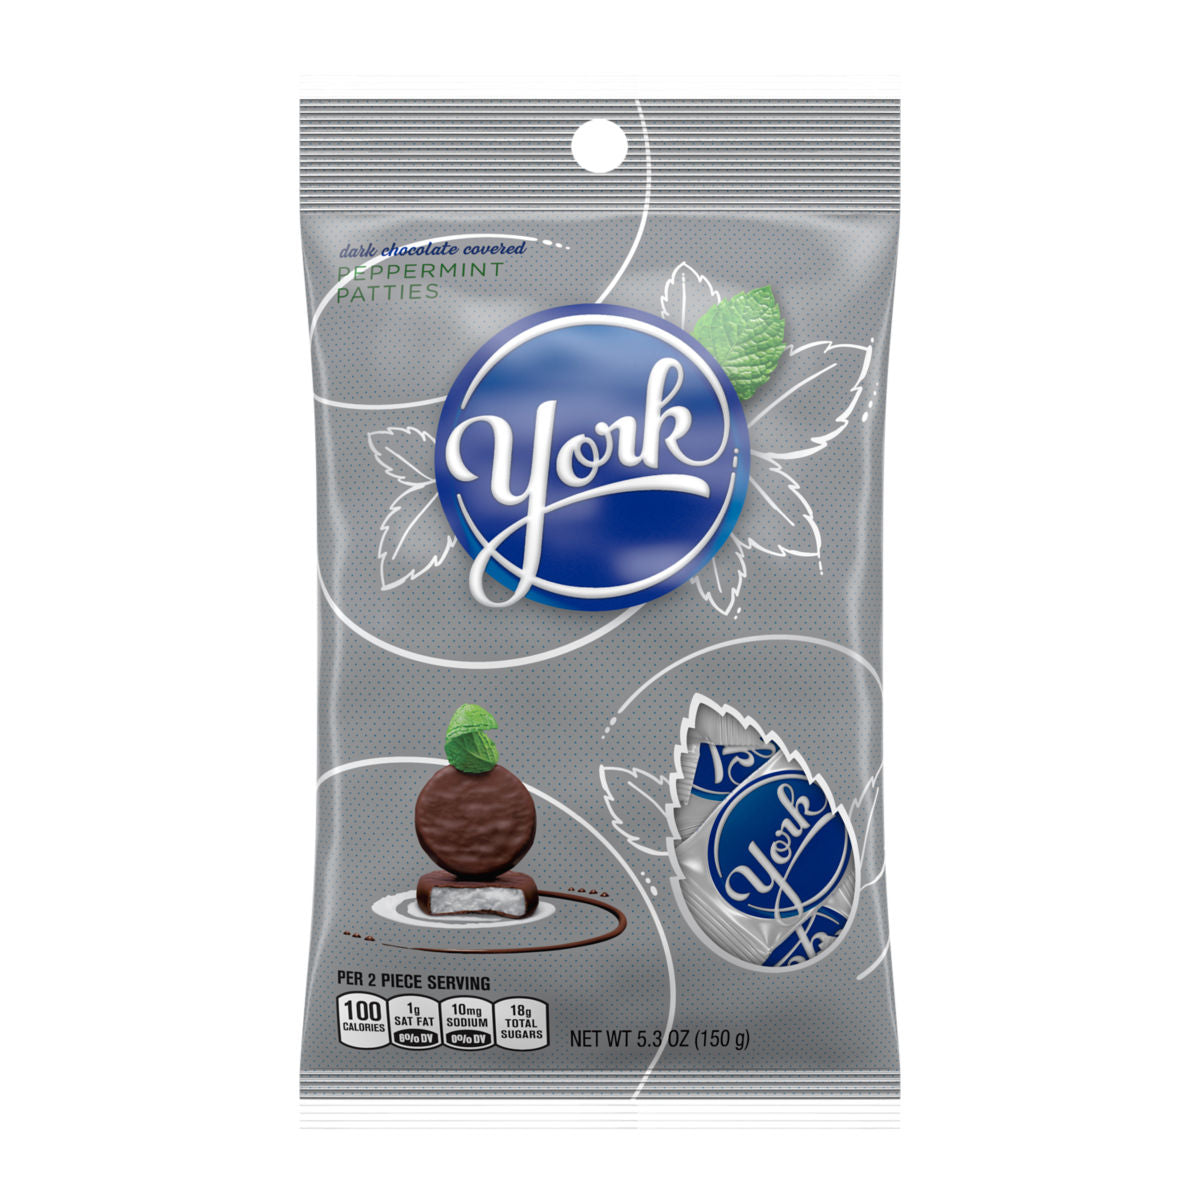 M&M'S Milk Chocolate Candy Peg Bag 5.3-Ounce (Pack of 12)